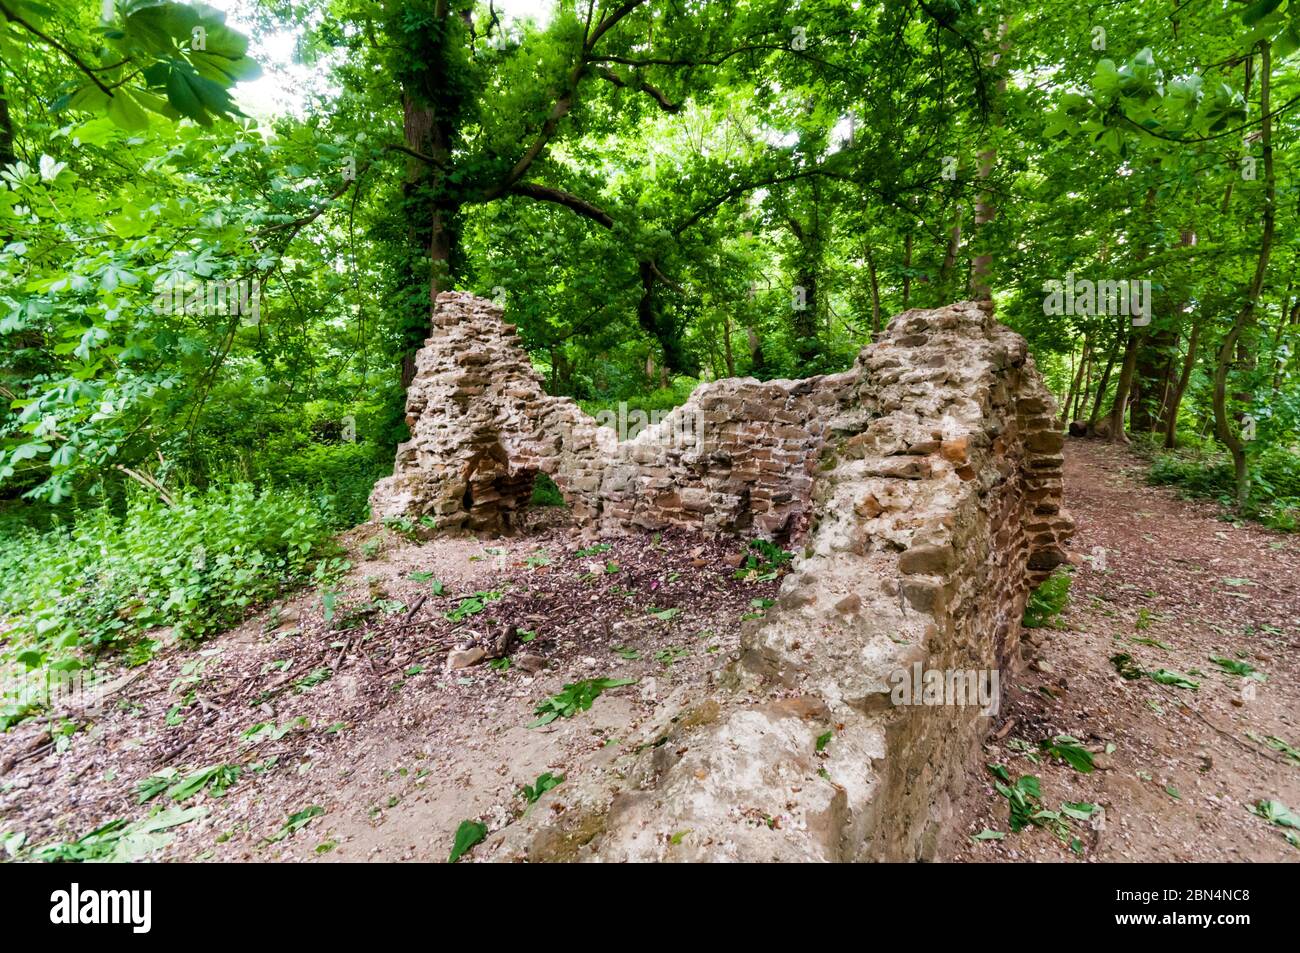 These ruins are all that remains of a medieval brick watchtower or warrener's lodge on Ken Hill in Snettisham, Norfolk. Stock Photo